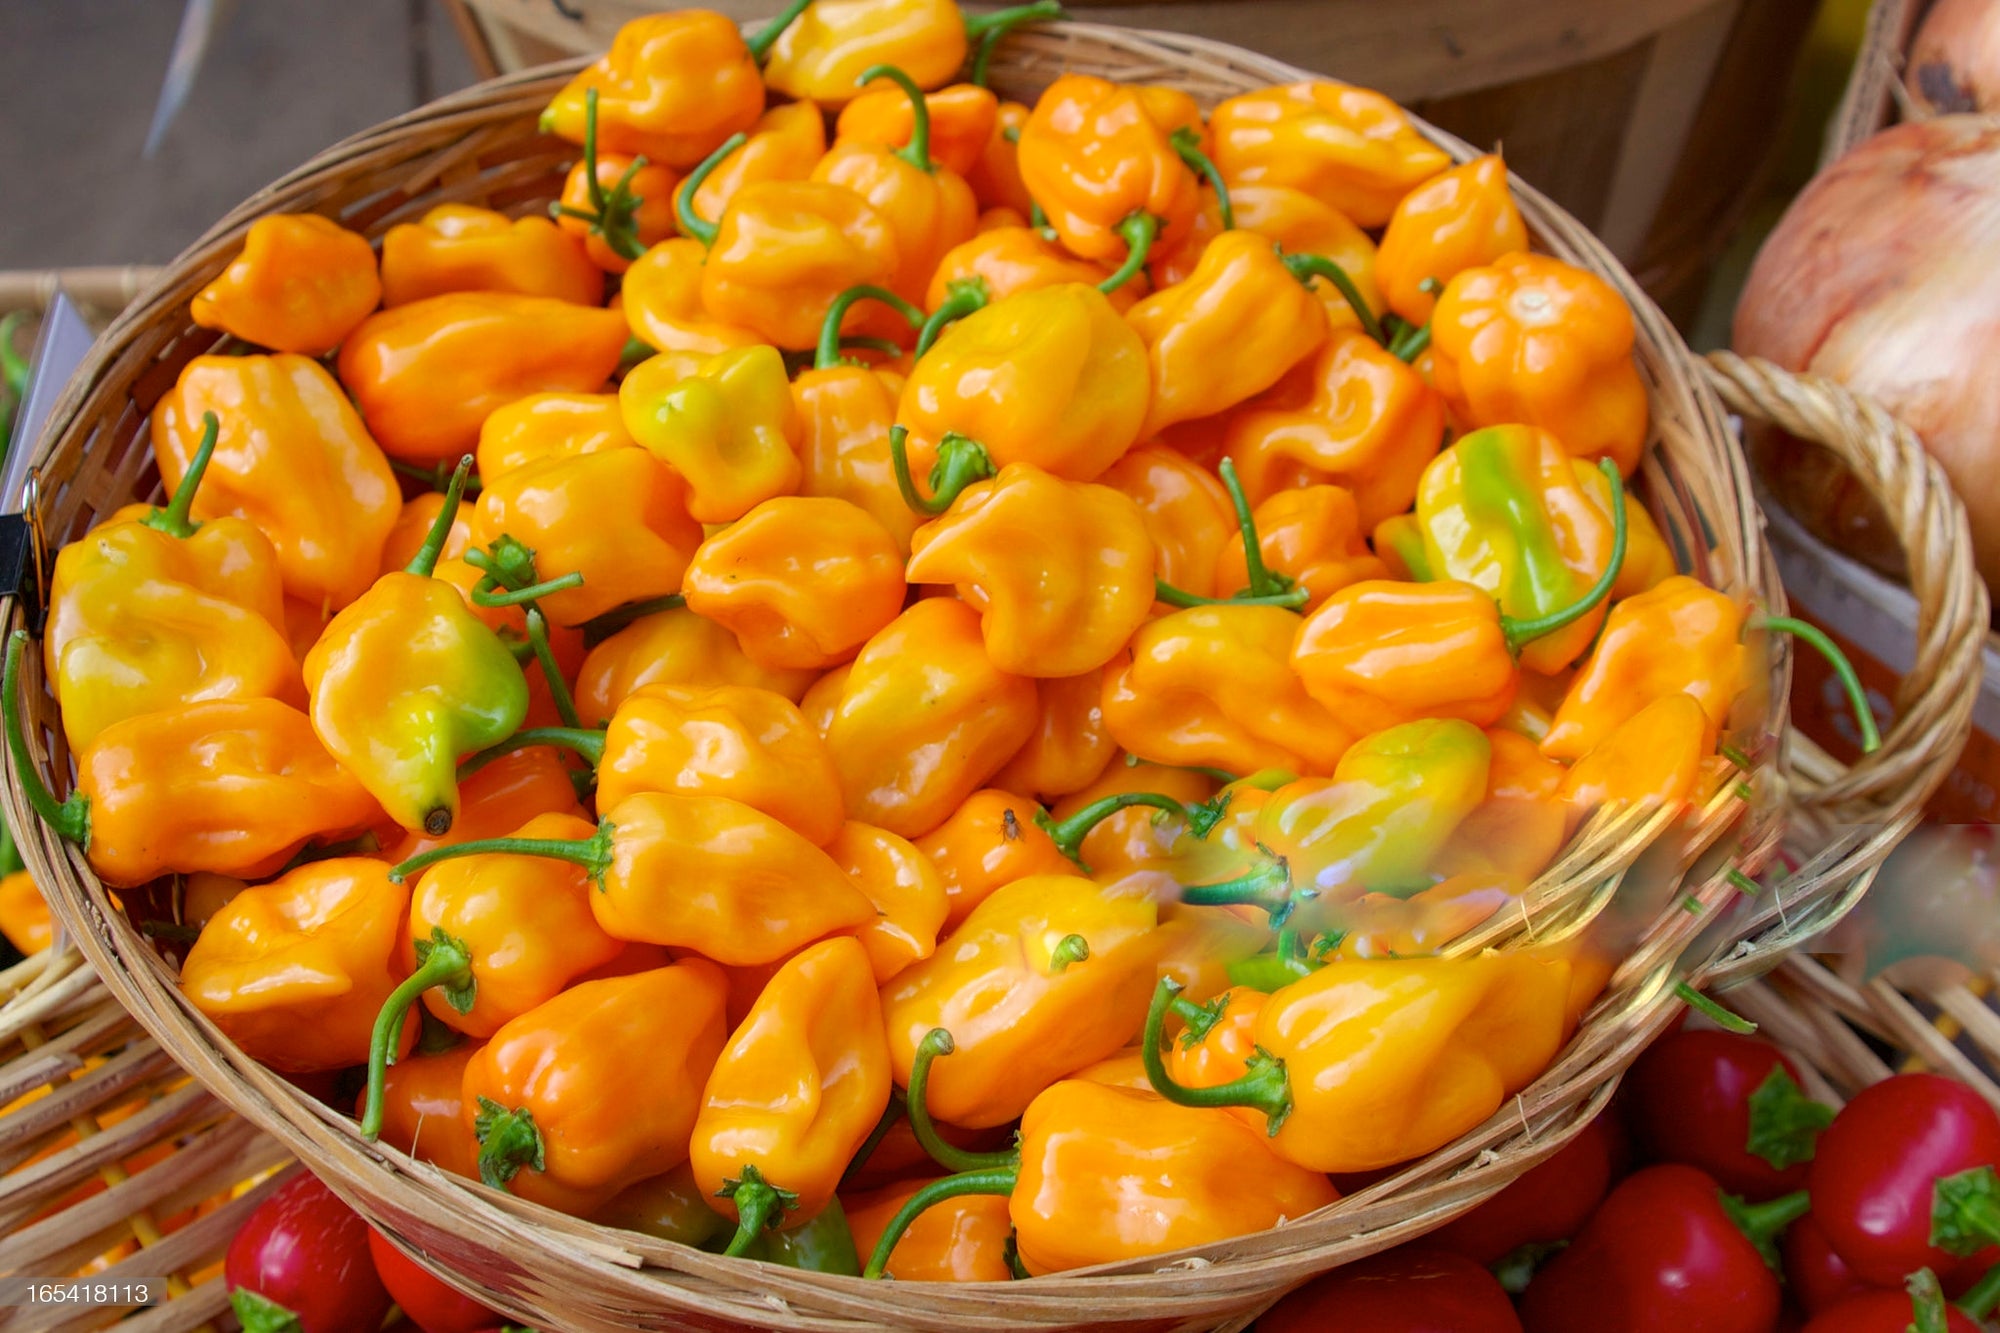 The History of the Habanero Pepper